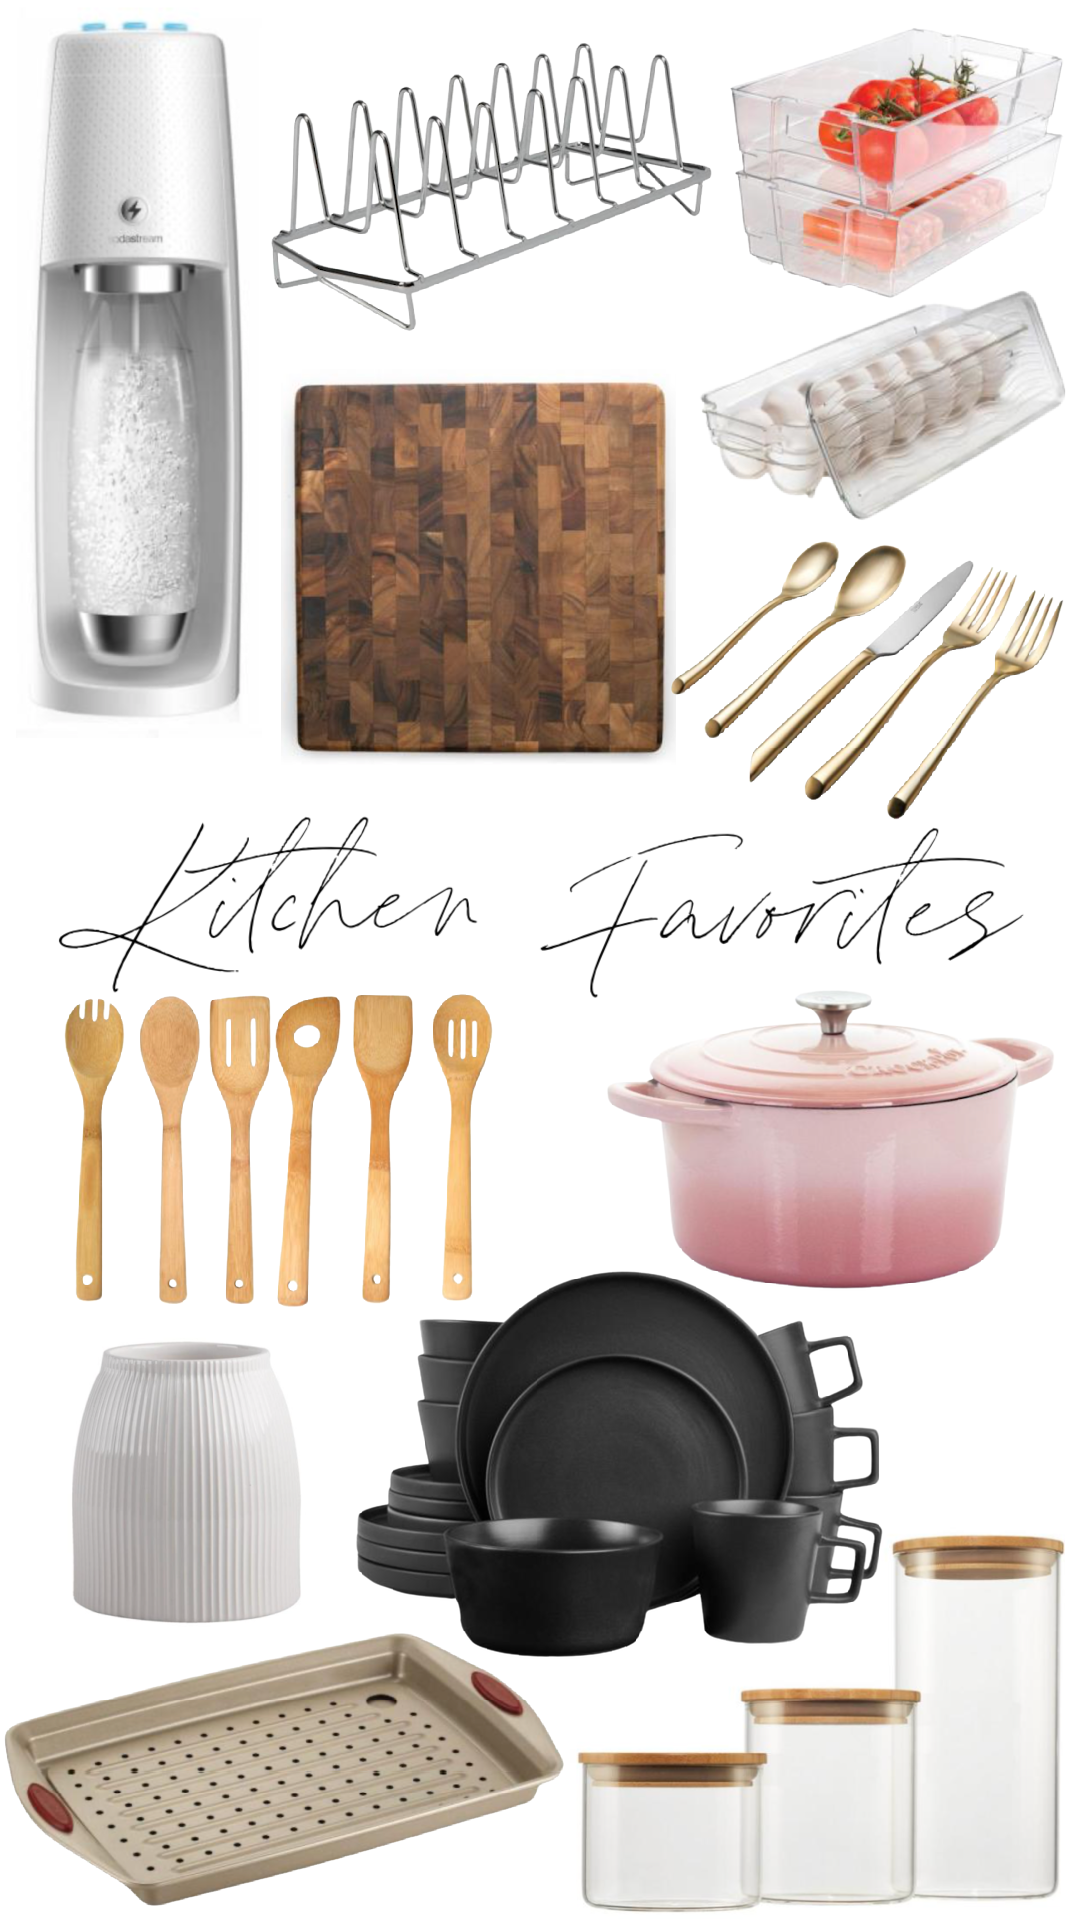 Favorite Kitchen Items- Where to get for Best Prices - Nesting With Grace